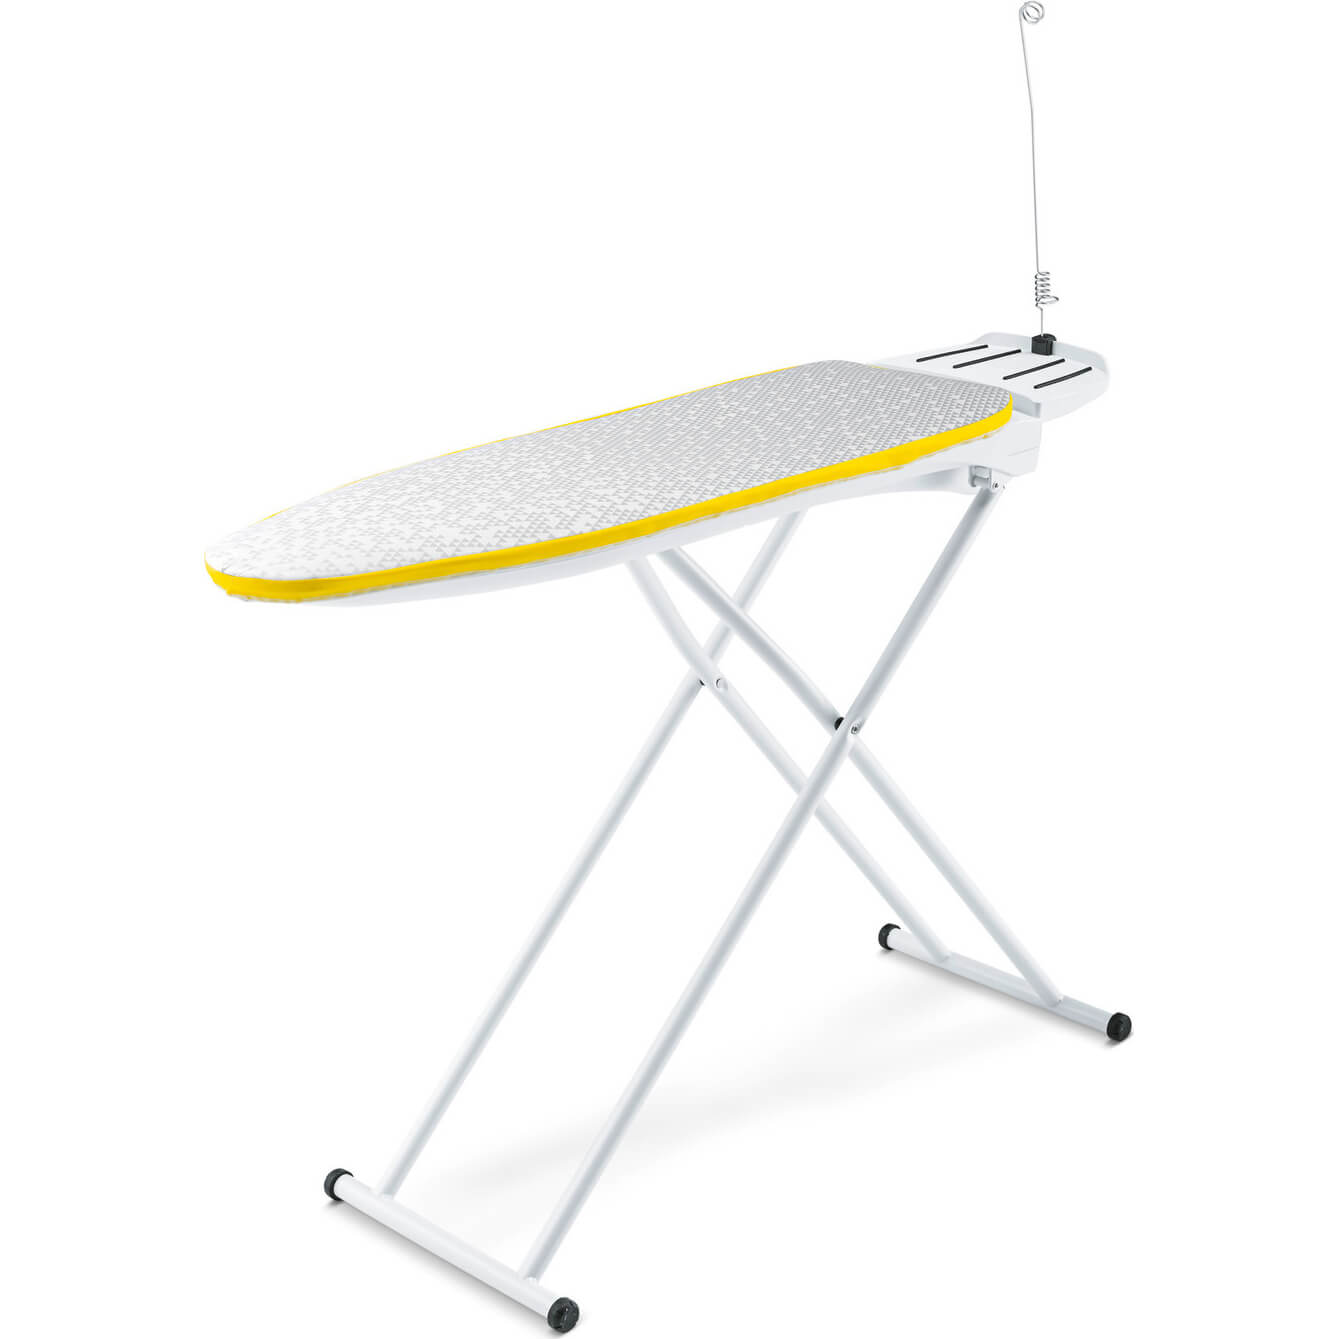 Karcher AB 1000 Ironing Board for EasyFix Iron